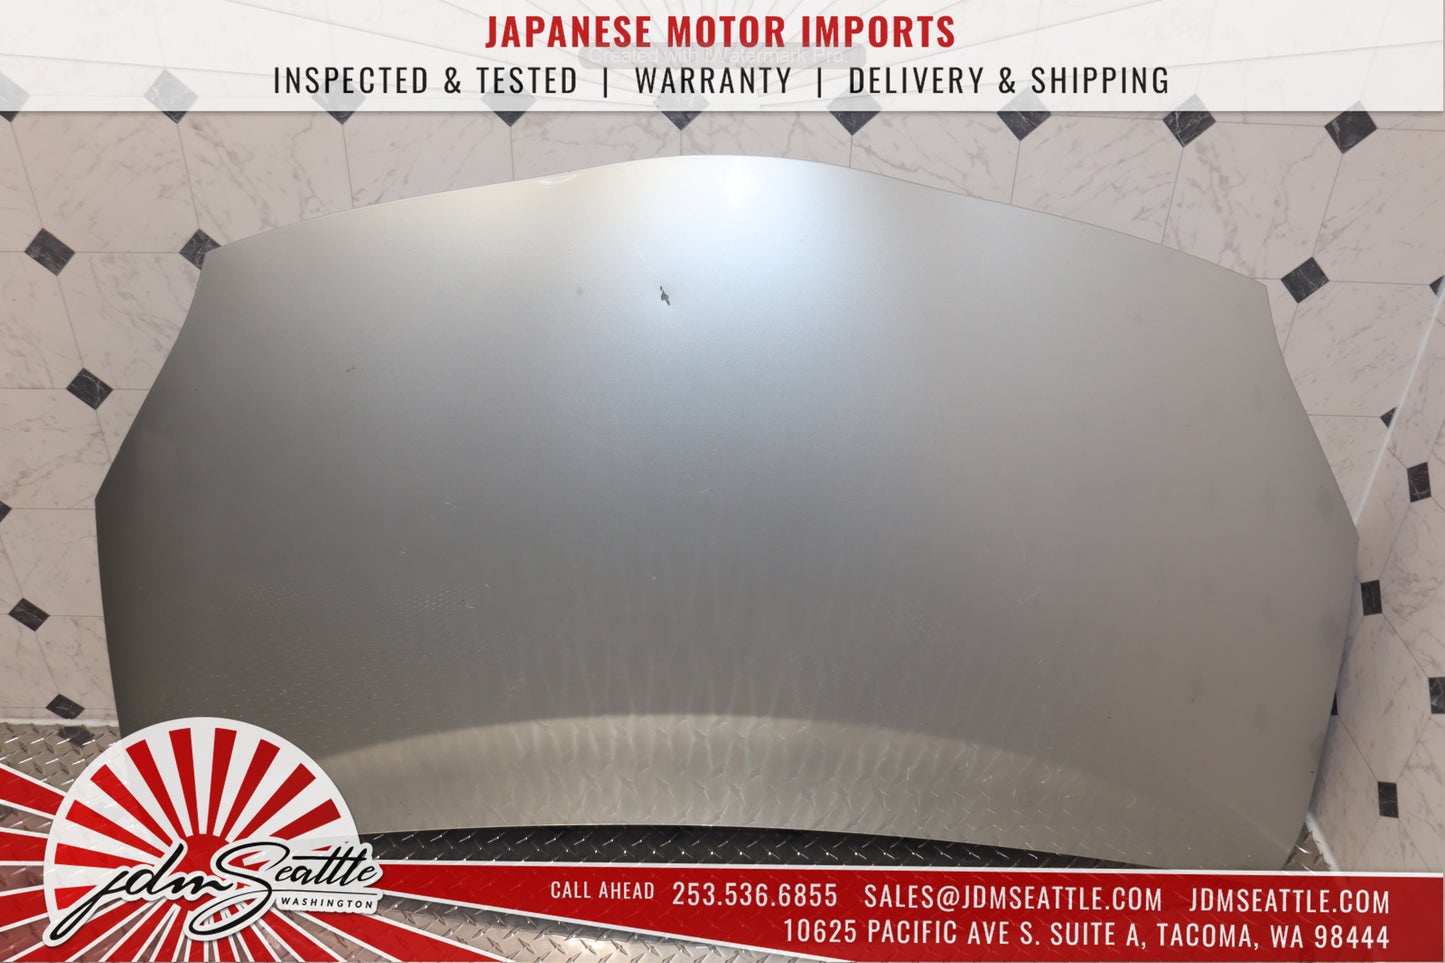 JDM 10-15 TOYOTA PRIUS HYBRID NOSECUT REPLACEMENT W/HOOD & FENDERS SILVER